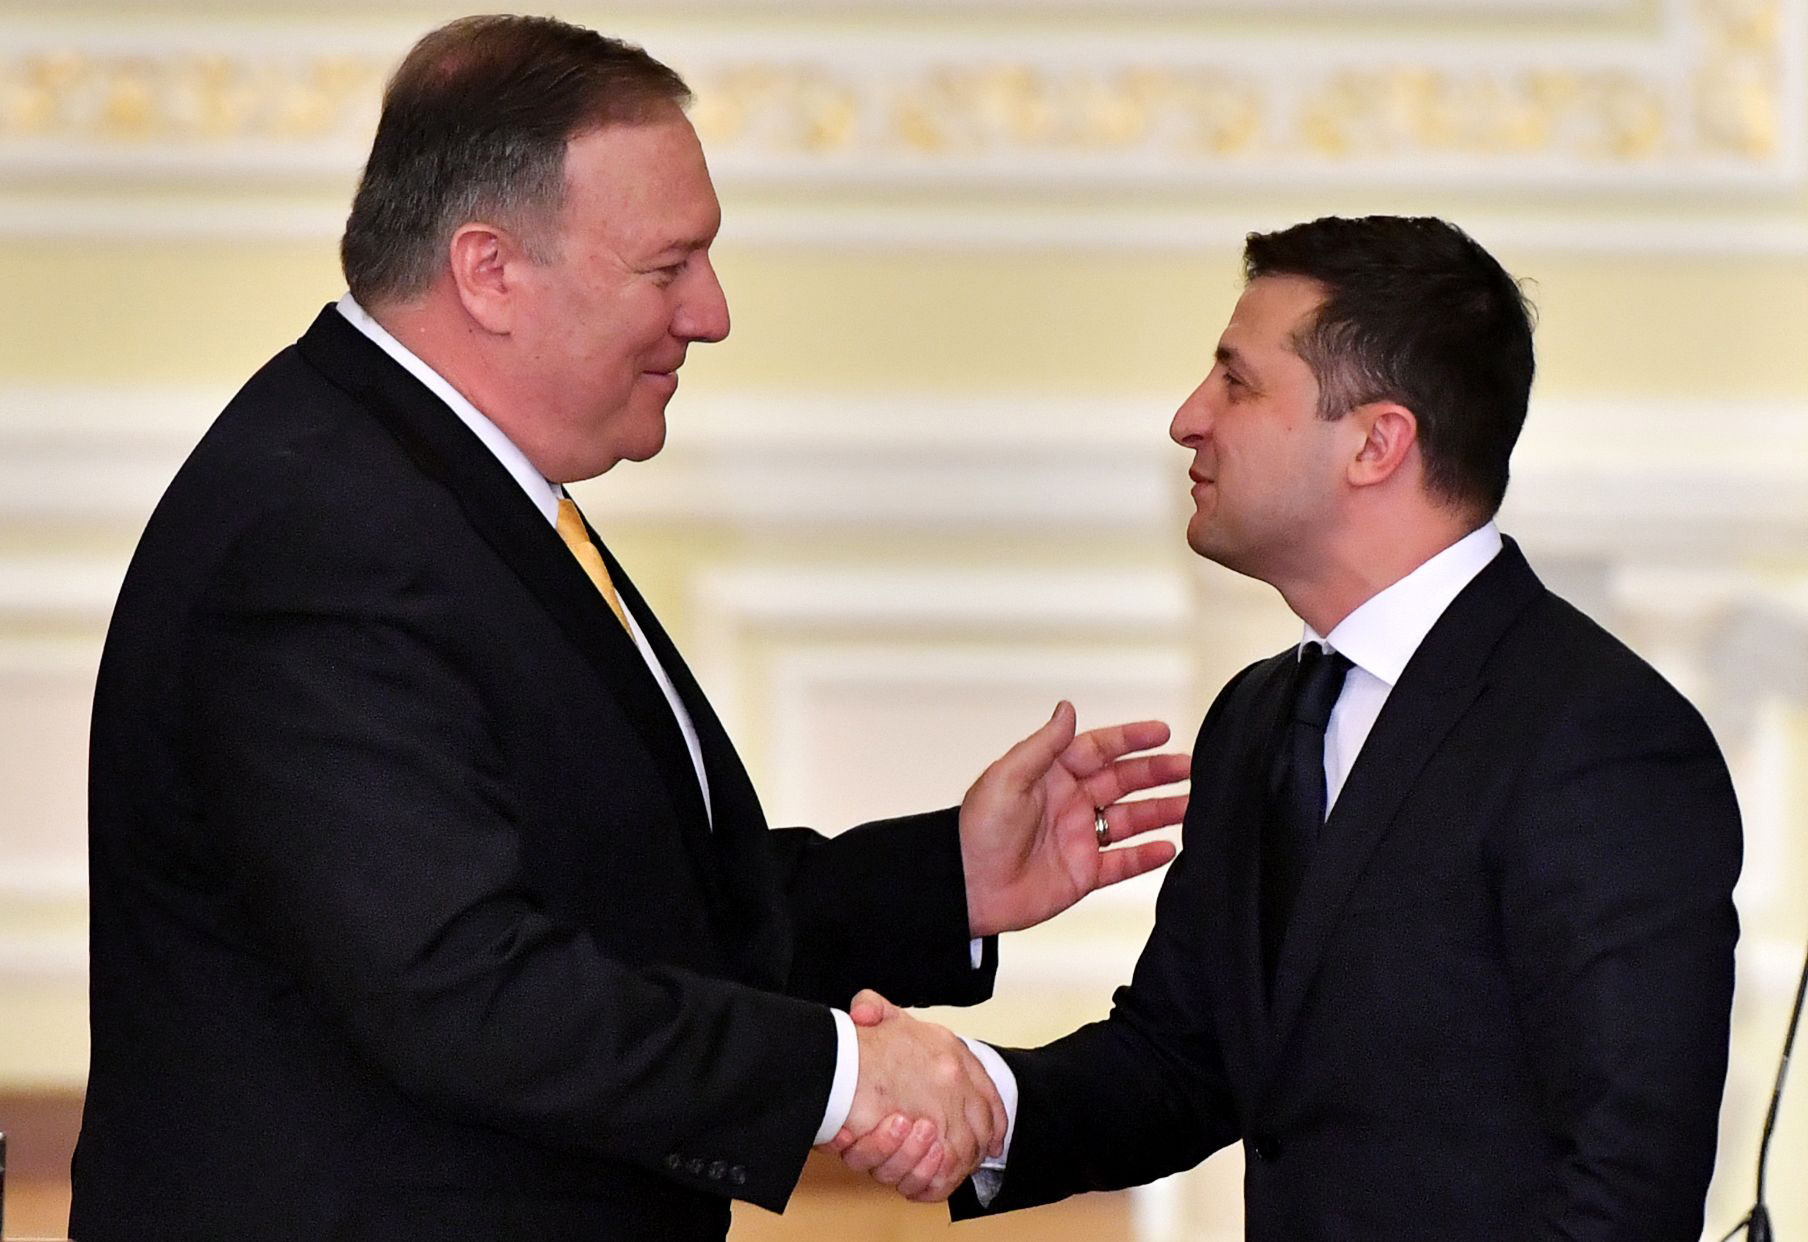 PHOTO: Secretary of State Mike Pompeo and Ukraine's President Volodymyr Zelenskyy shake hands during a joint news conference in Kiev on Jan 31, 2020.